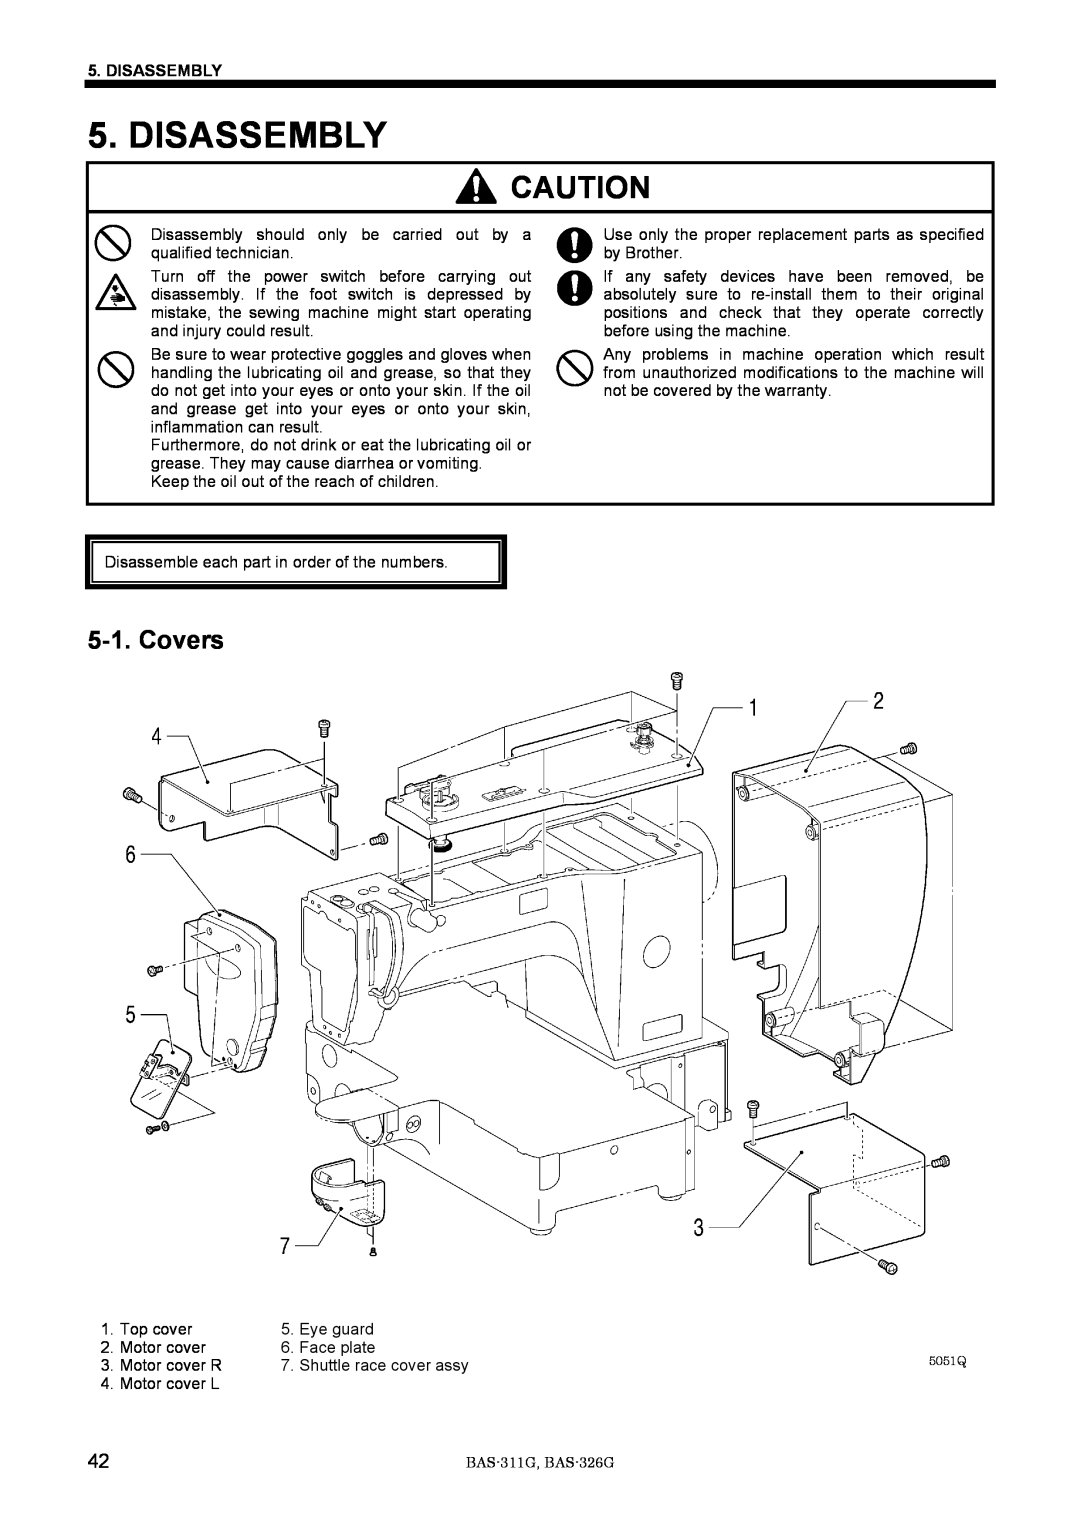 Brother BAS-311G service manual Disassembly, Covers 